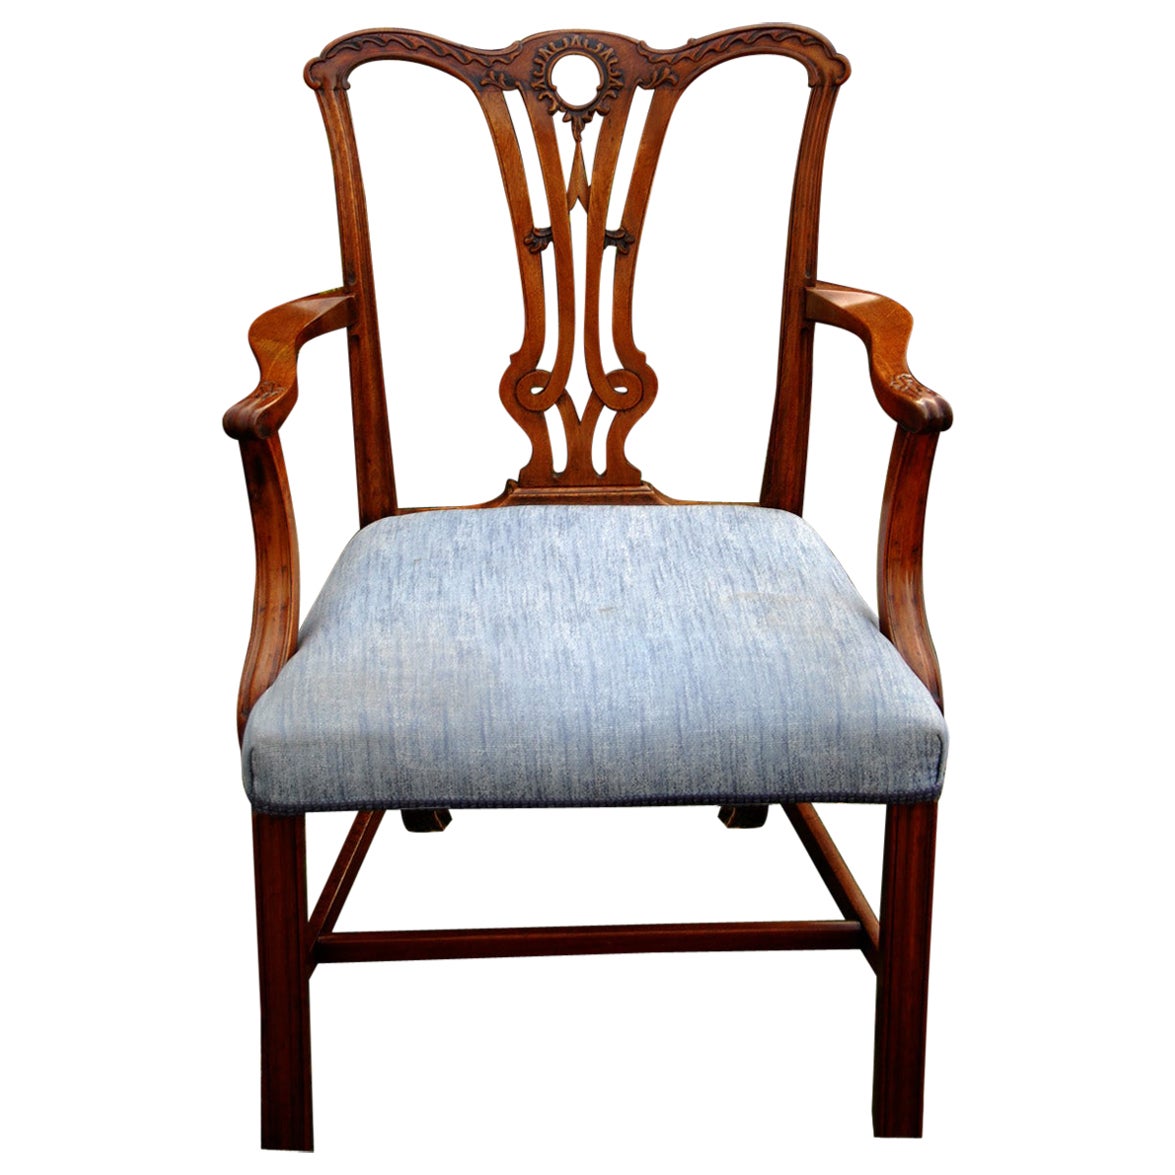 English Georgian Chippendale Mahogany Carved Armchair with Over Upholstered Seat